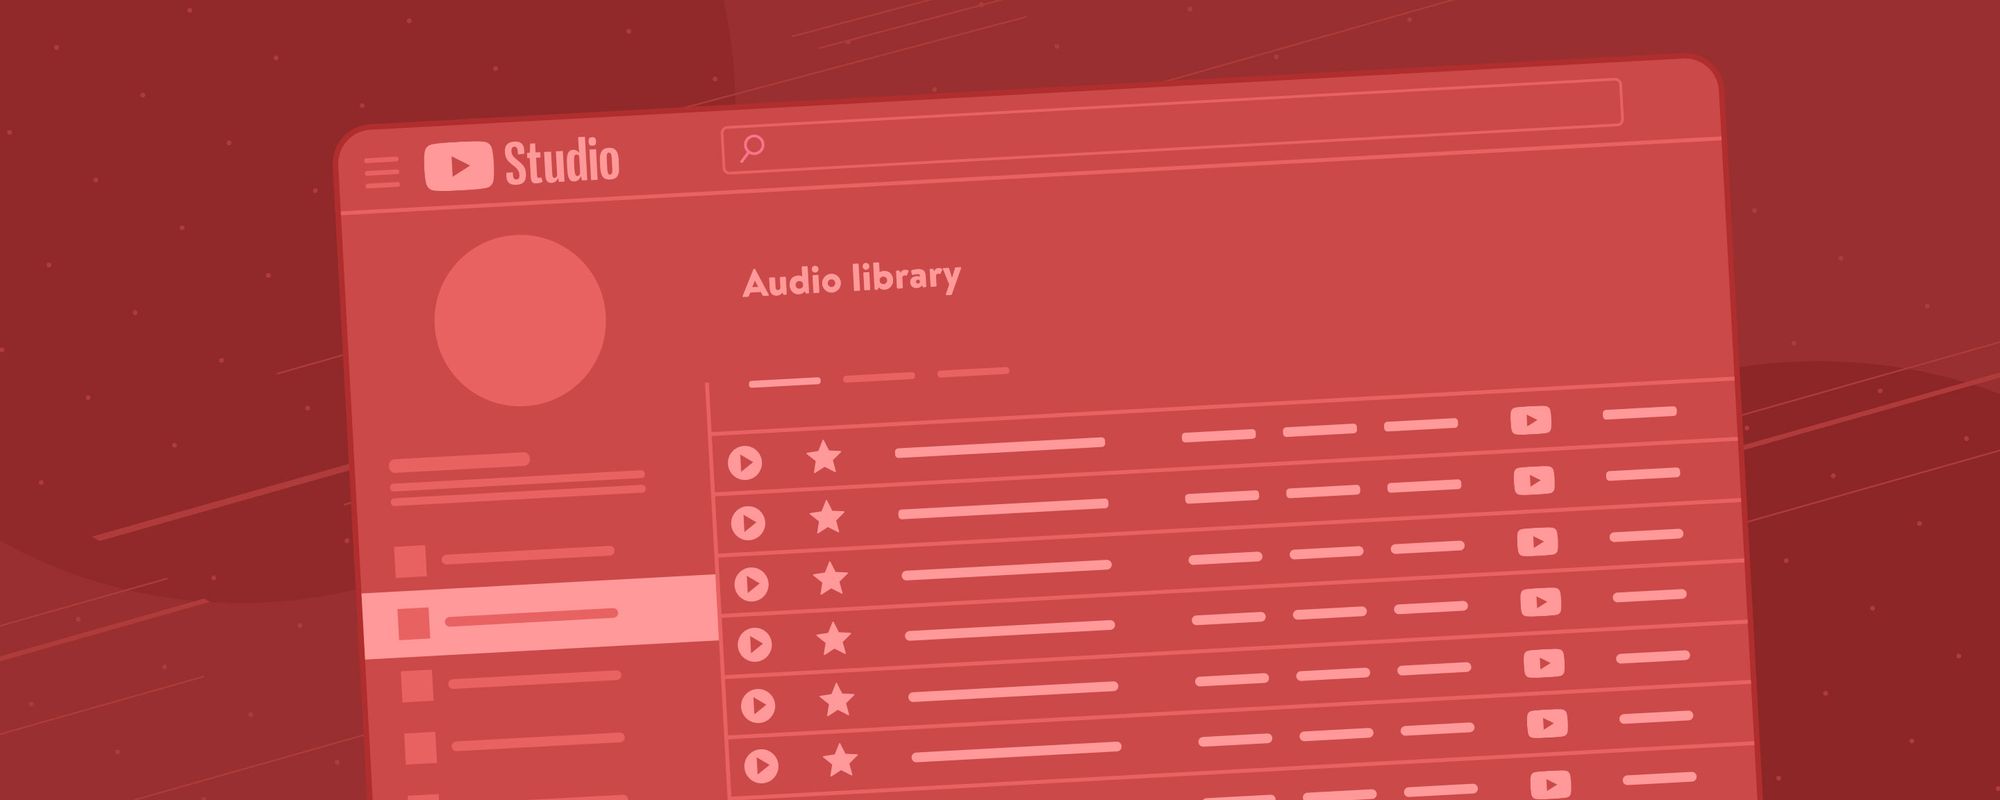 Illustration of the YouTube Audio Library user interface.